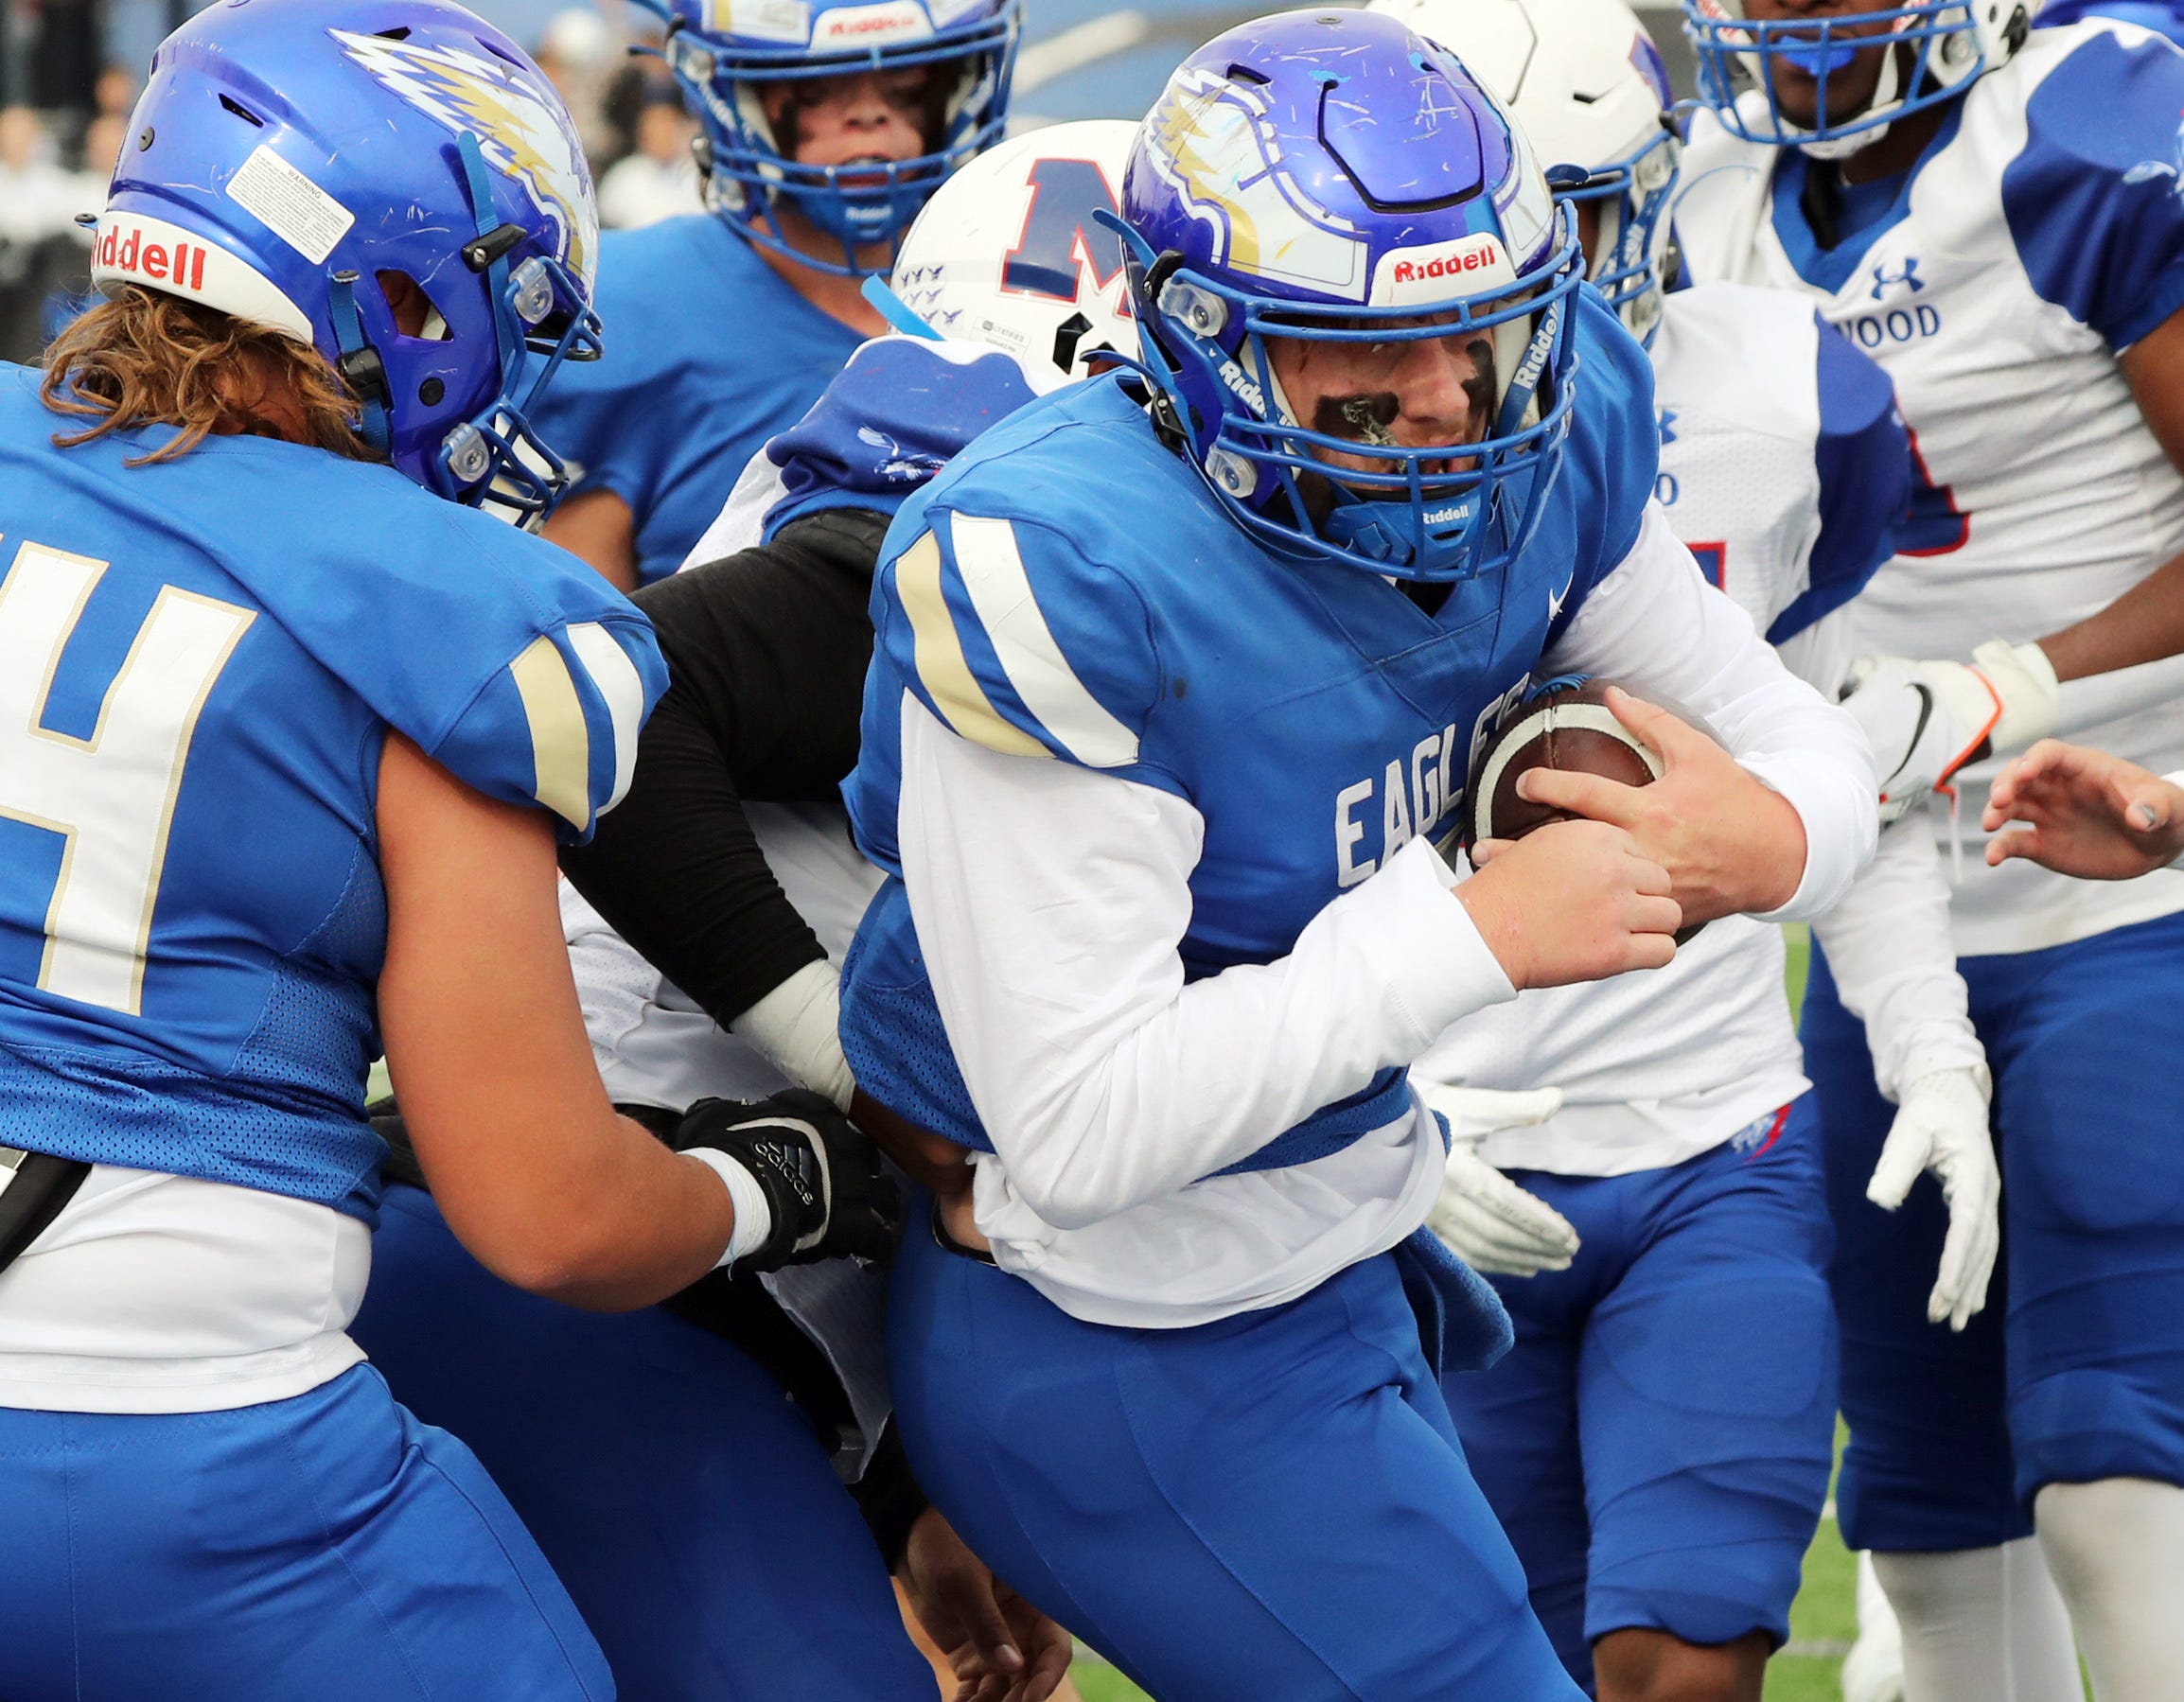 Class 2A football district 58 previews Polls, storylines, players